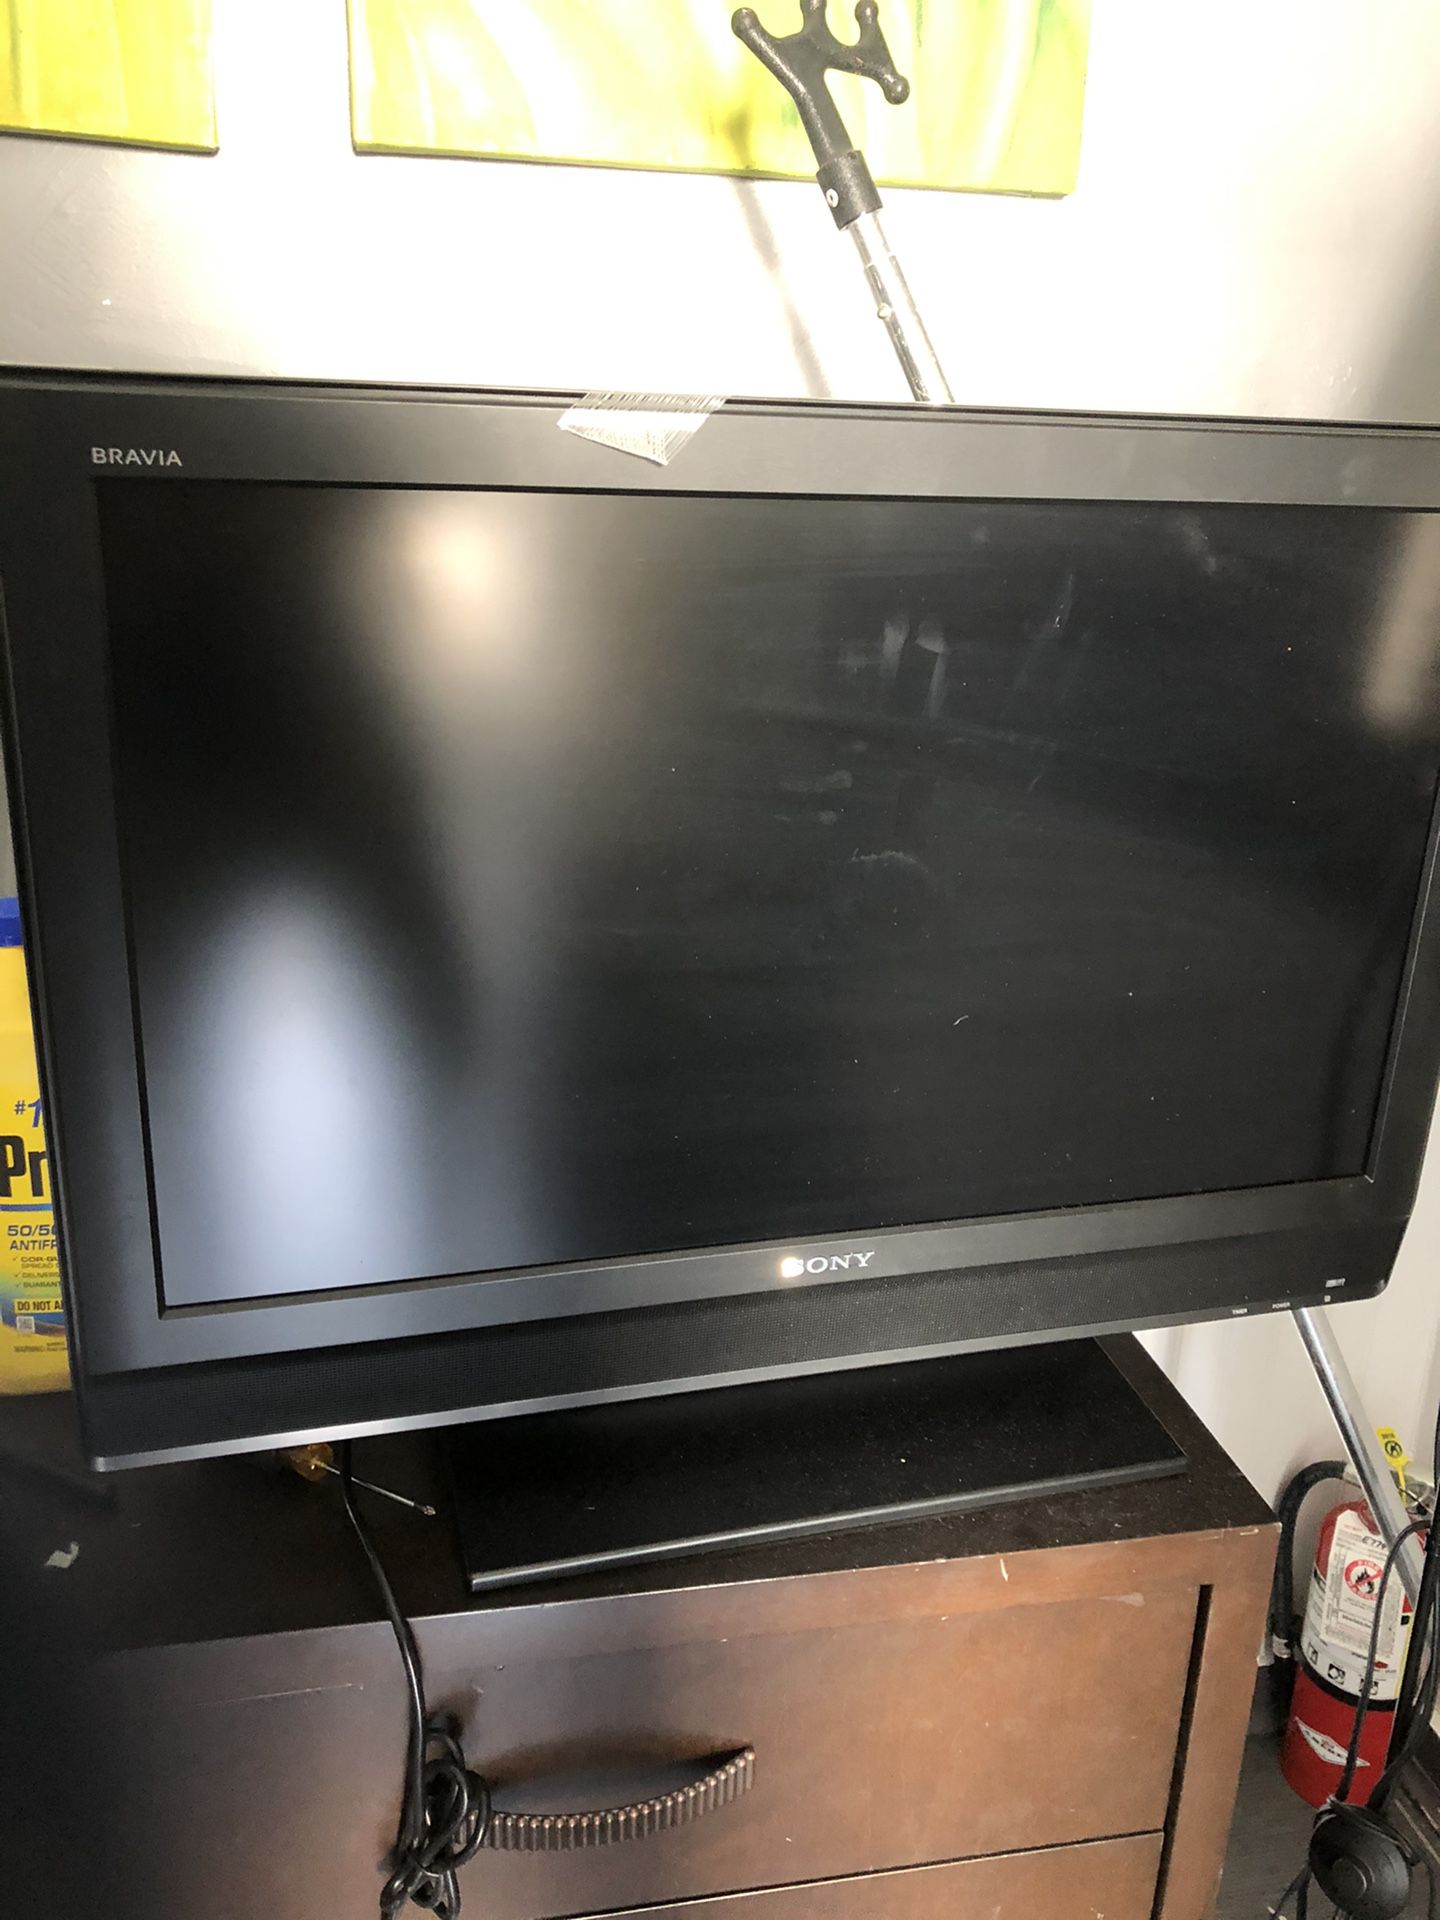 32" SONY Flat Screen Television